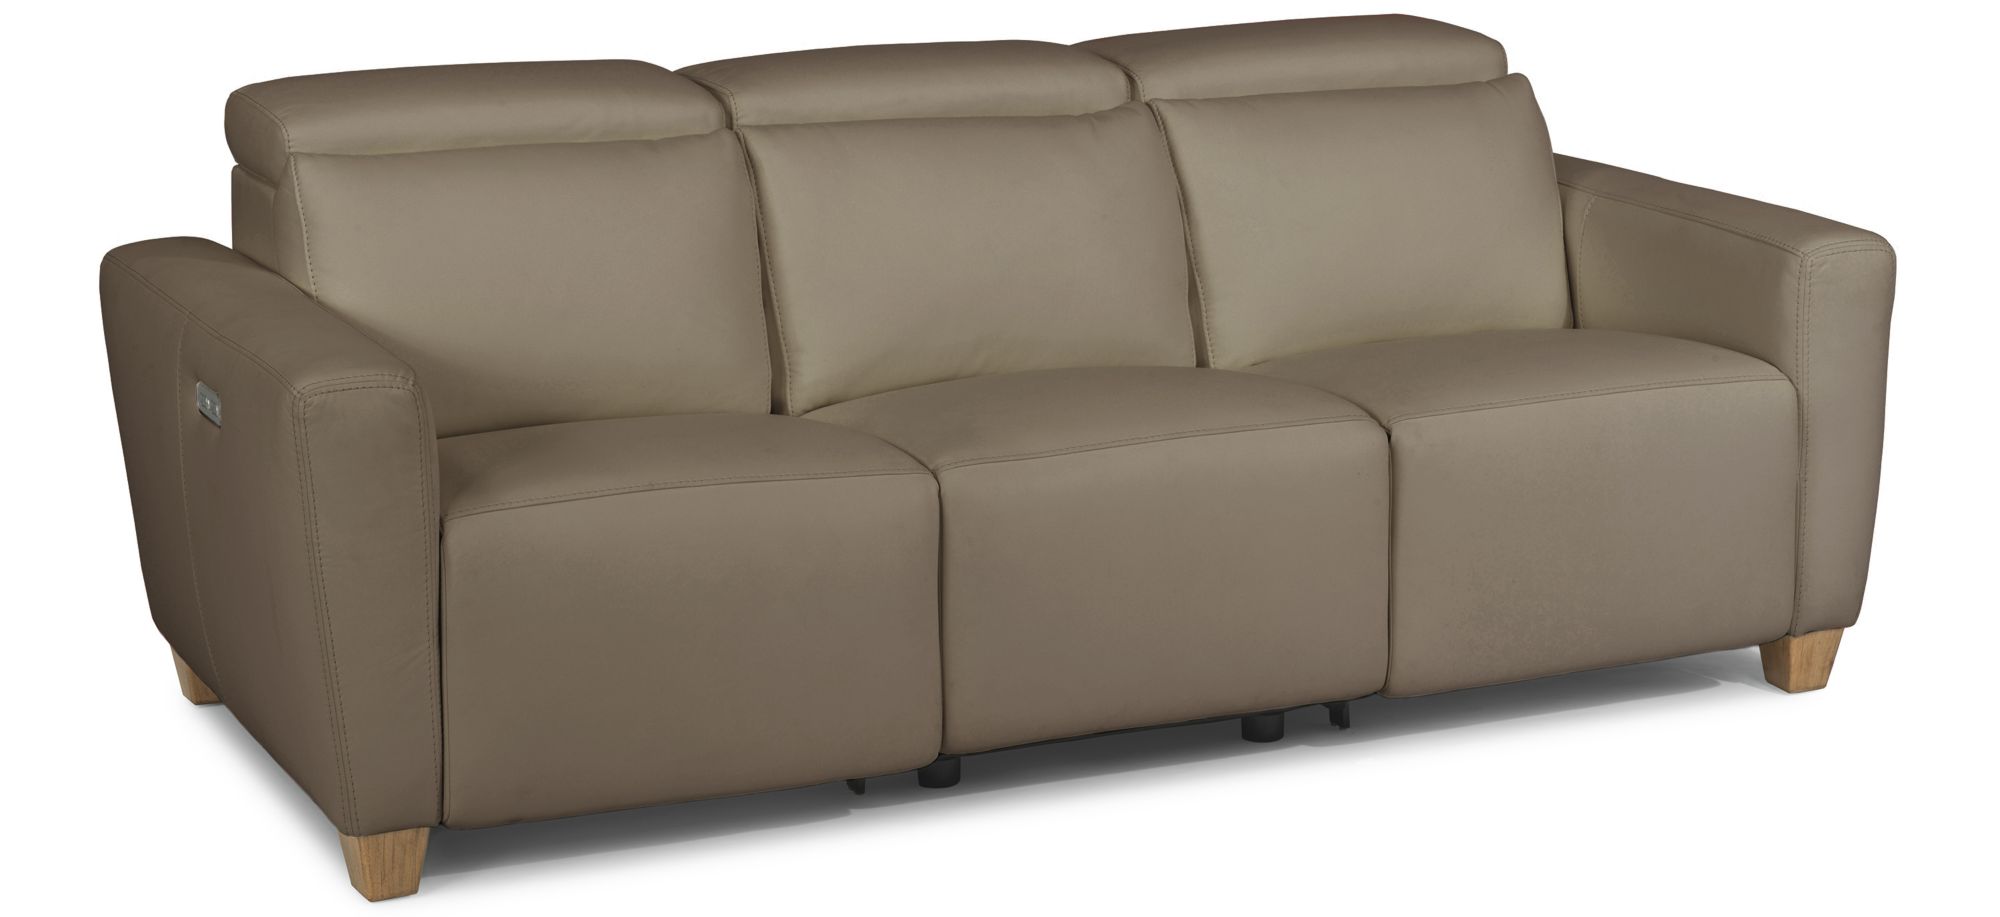 Astra 3 pc. Sofa in Brown by Flexsteel